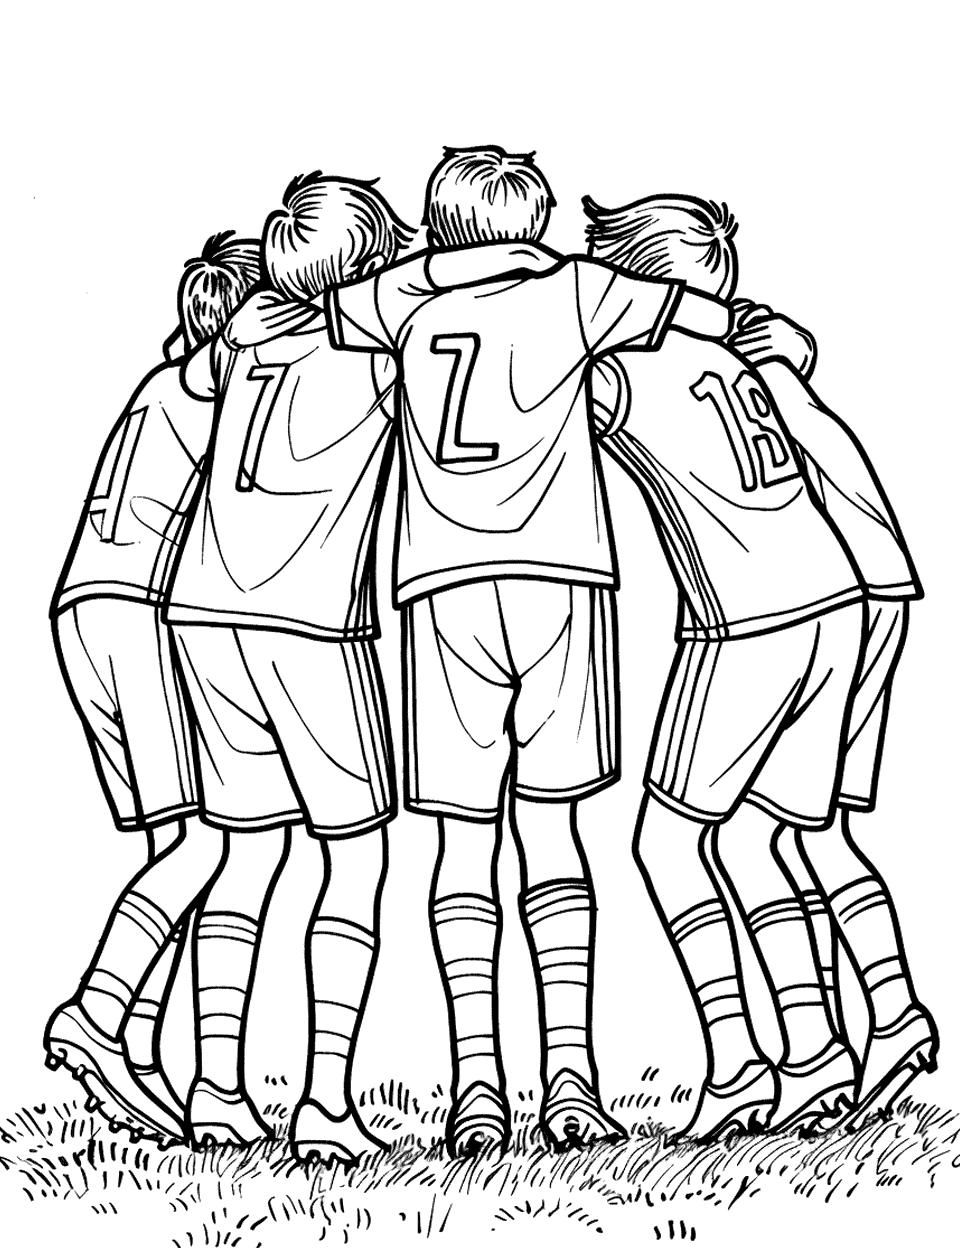 Team Huddle Soccer Coloring Page - The team in a huddle on the field, ready to start the game.